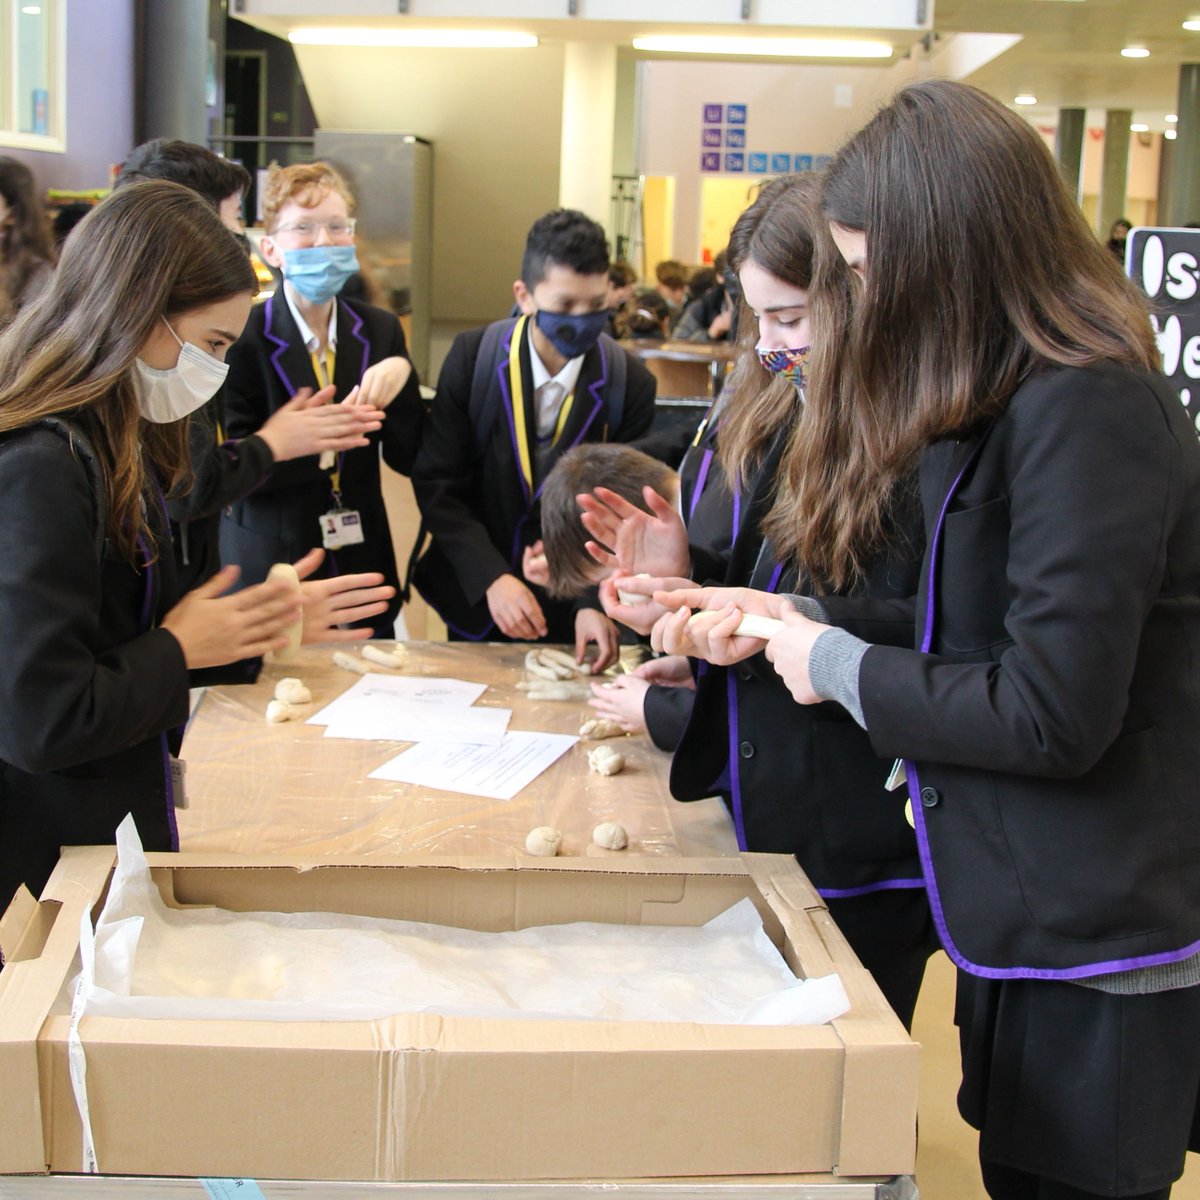 Students participated in JCoSS Shabbat at lunchtime today, where they had great fun plaiting challot. They will be baked and then sold tomorrow, with the proceeds going to our school charities. #JCoSSShabbat #challahplaiting #lunchtimefun